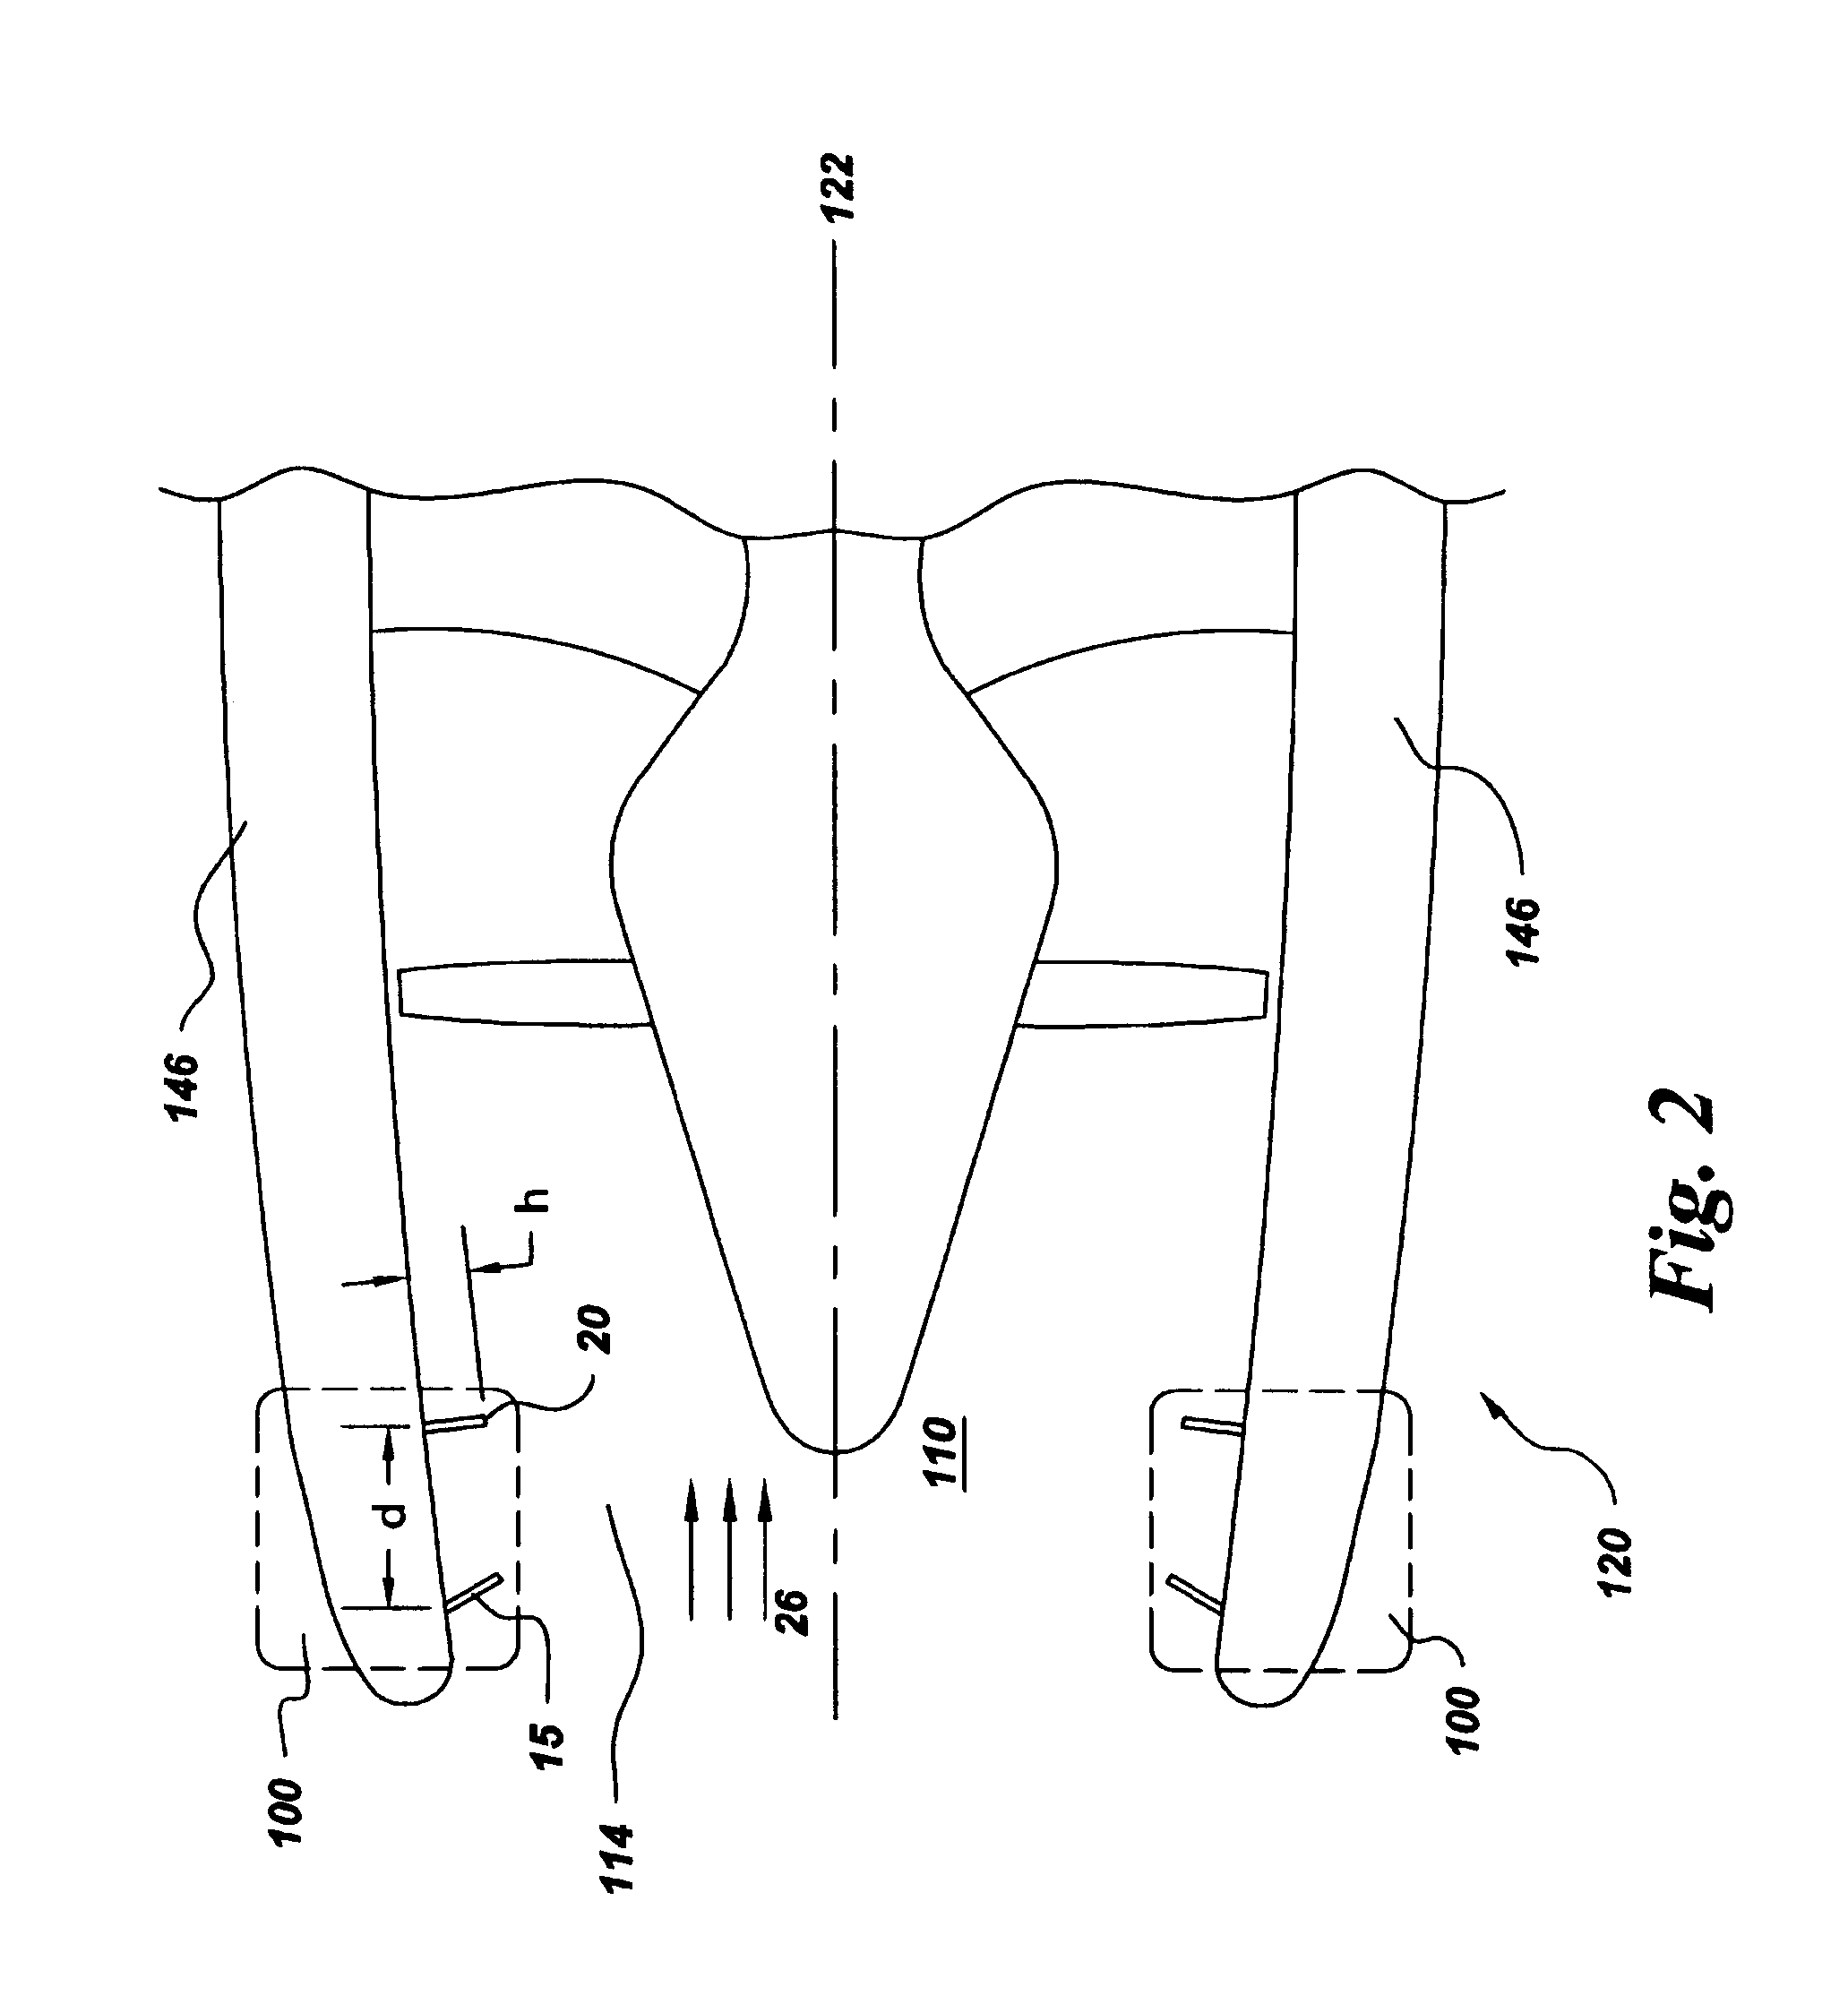 System and method for actively changing an effective flow-through area of an inlet region of an aircraft engine